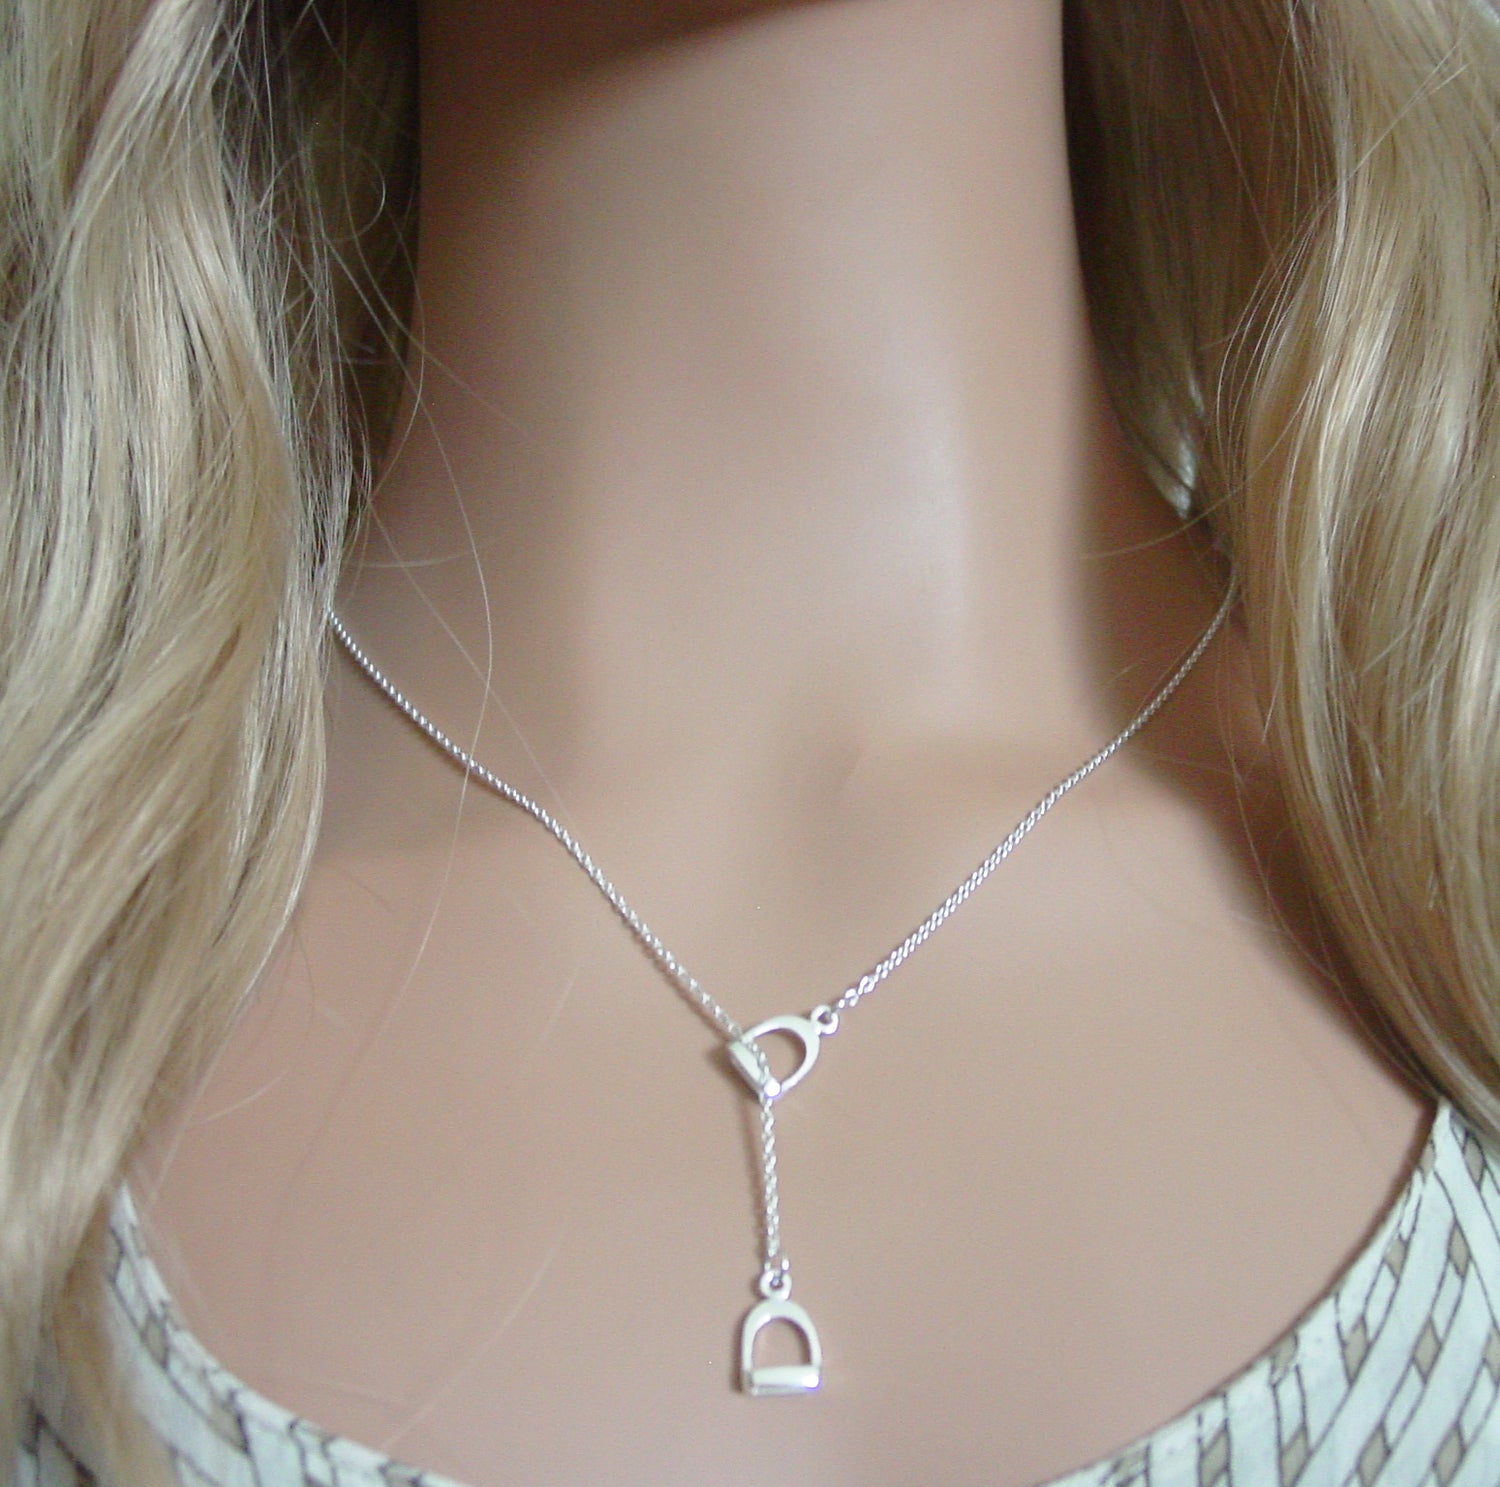 Elsa Peretti™ Open Heart Lariat Necklace in Silver with Pearls, 7.5-8 mm |  Tiffany & Co.